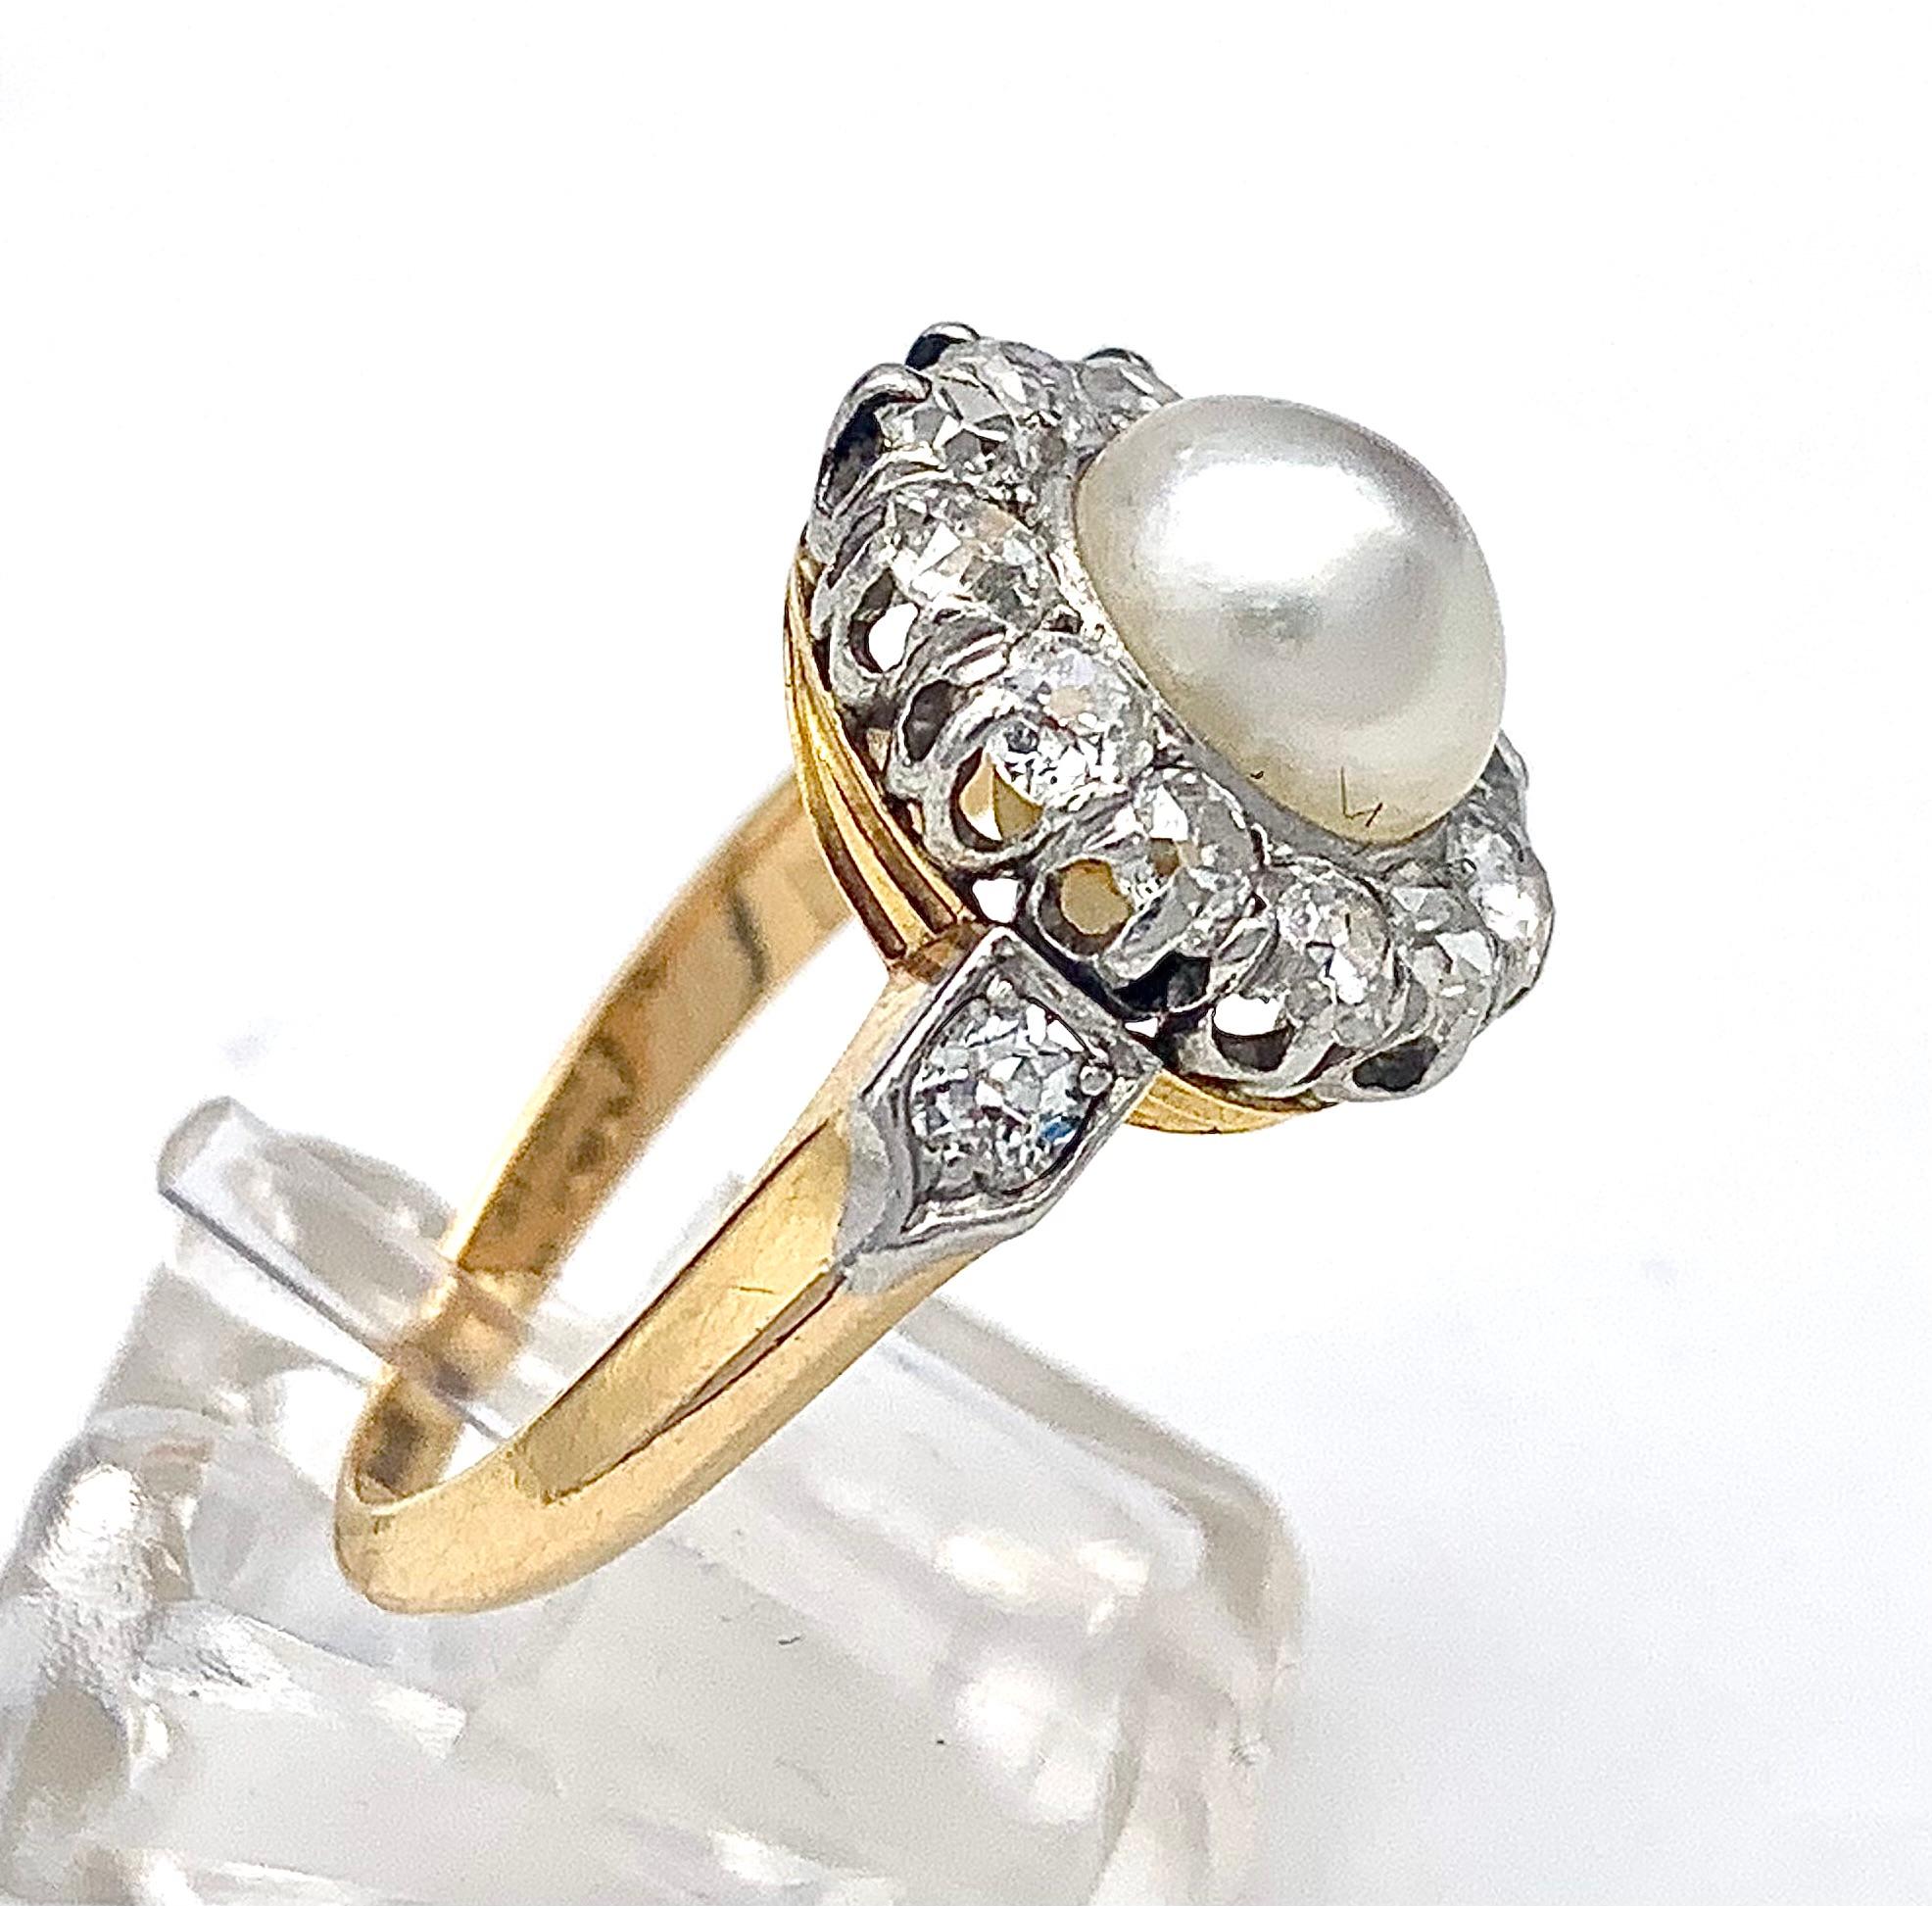 This ring is made out of 18 karat yellow gold and platinum the ring head features ca natural oriental button pearl surrounded by lovely white diamonds, all set in platinum. The ring shoulders are also decorated with a diamond each set in platinum. 